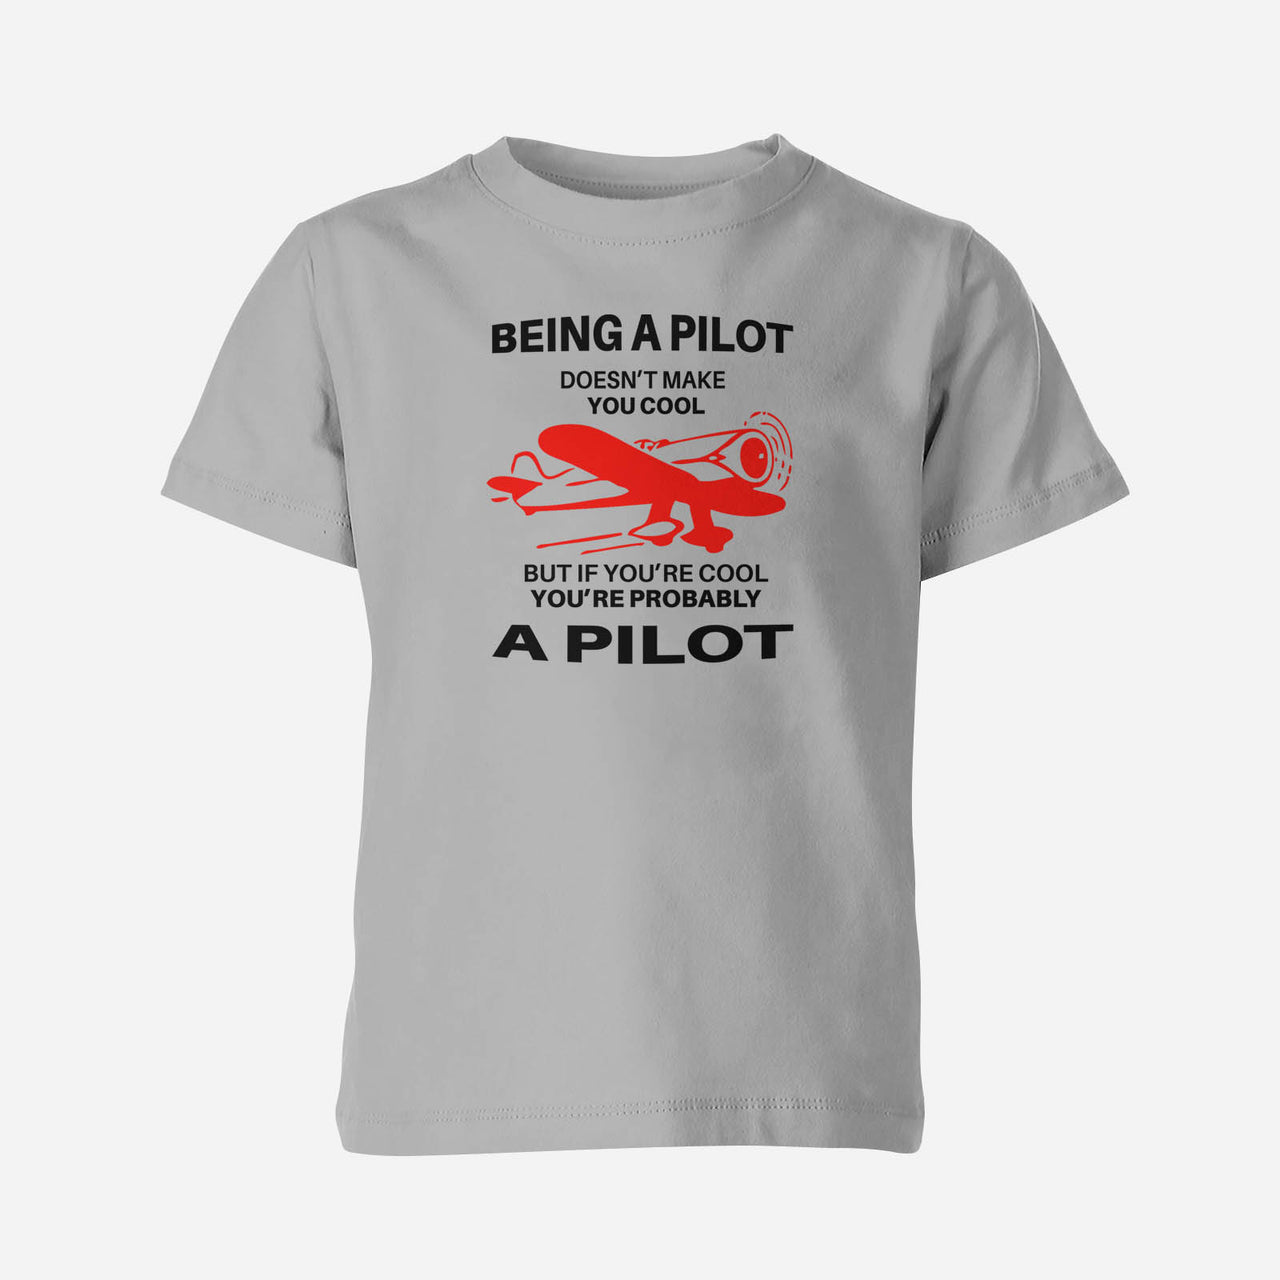 If You're Cool You're Probably a Pilot Designed Children T-Shirts